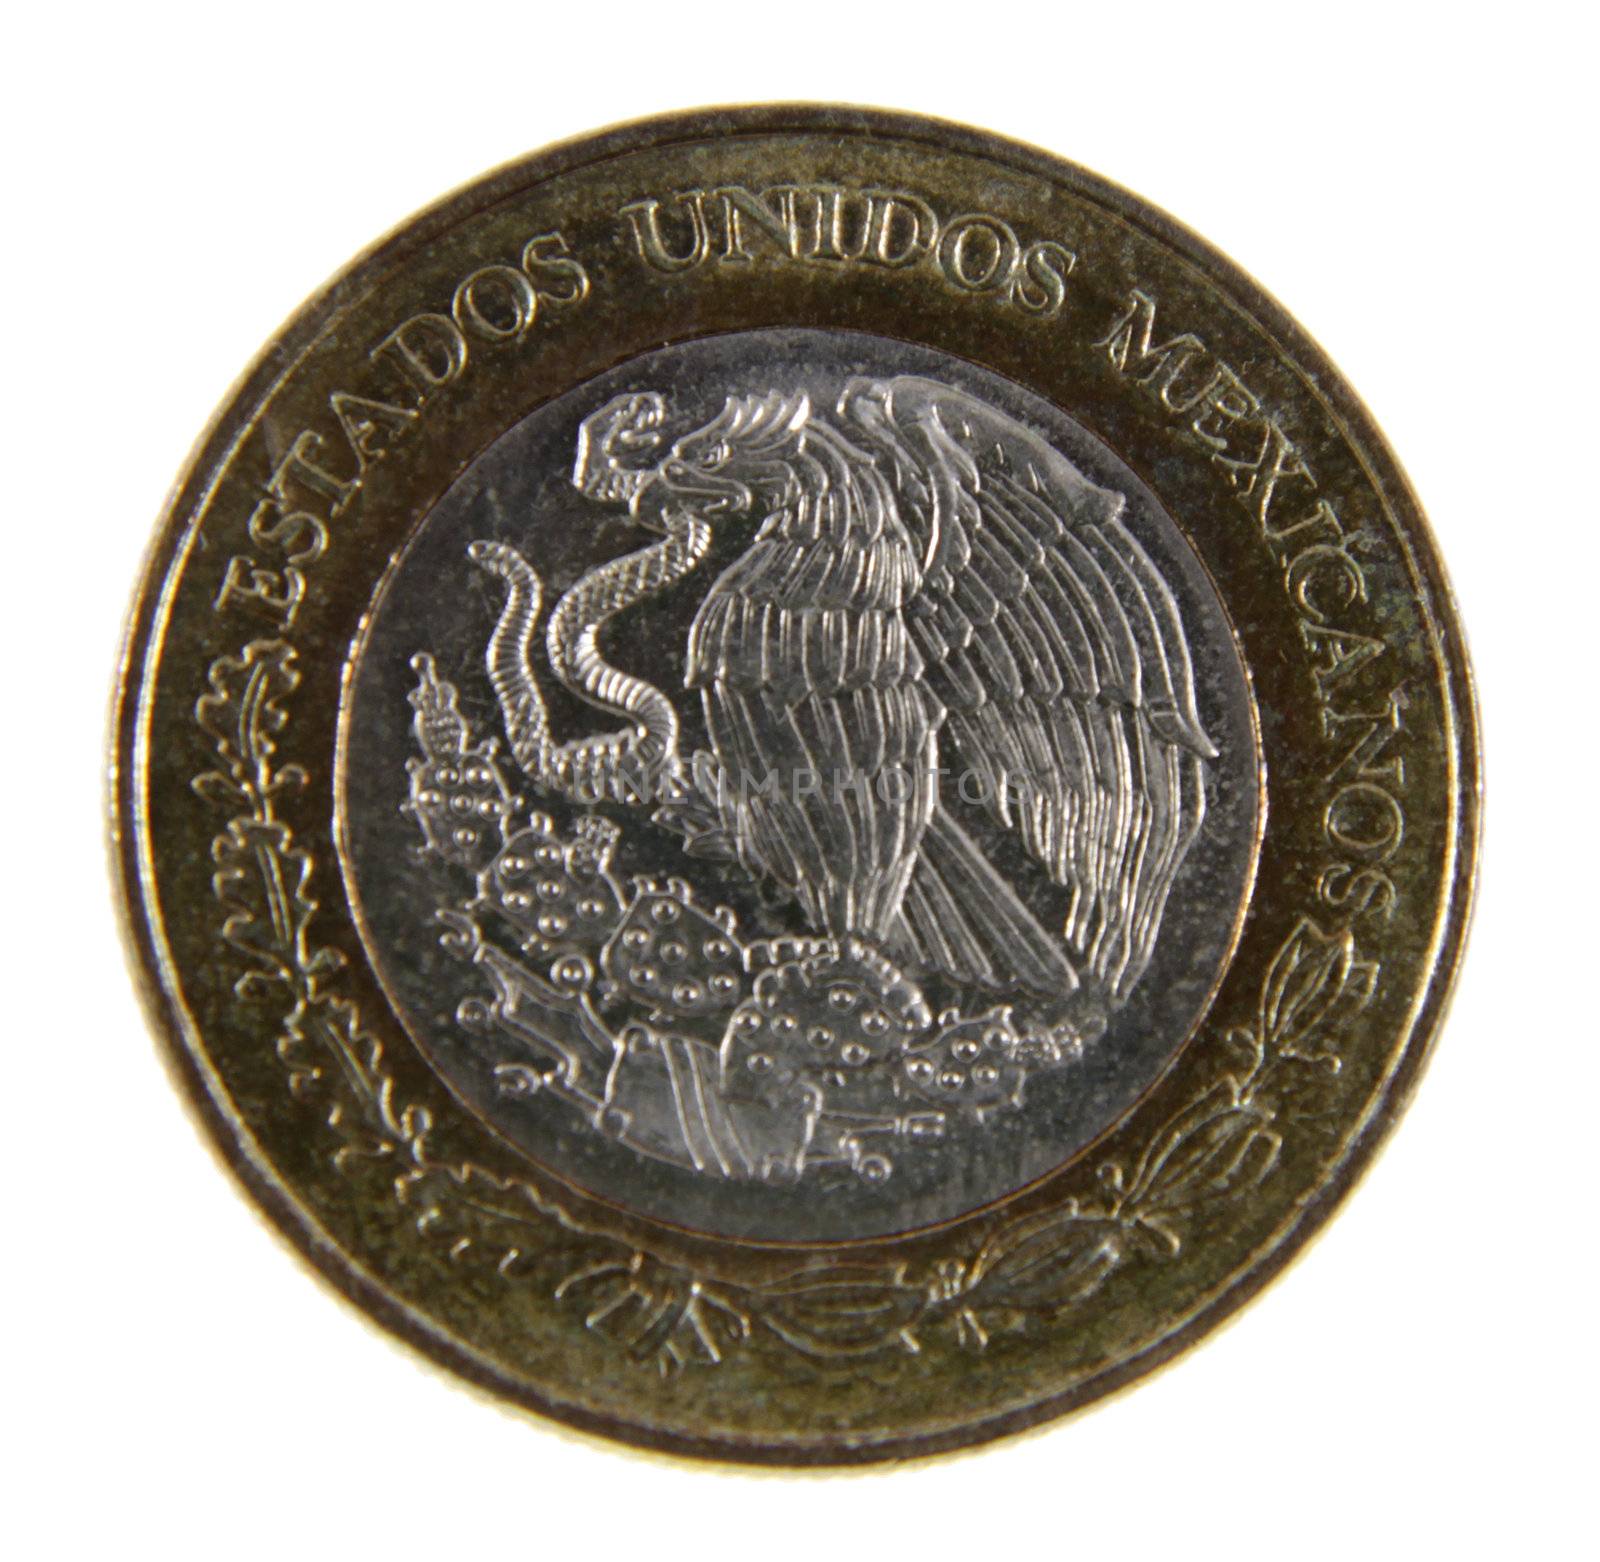 A close-up shot of a Mexican peso.